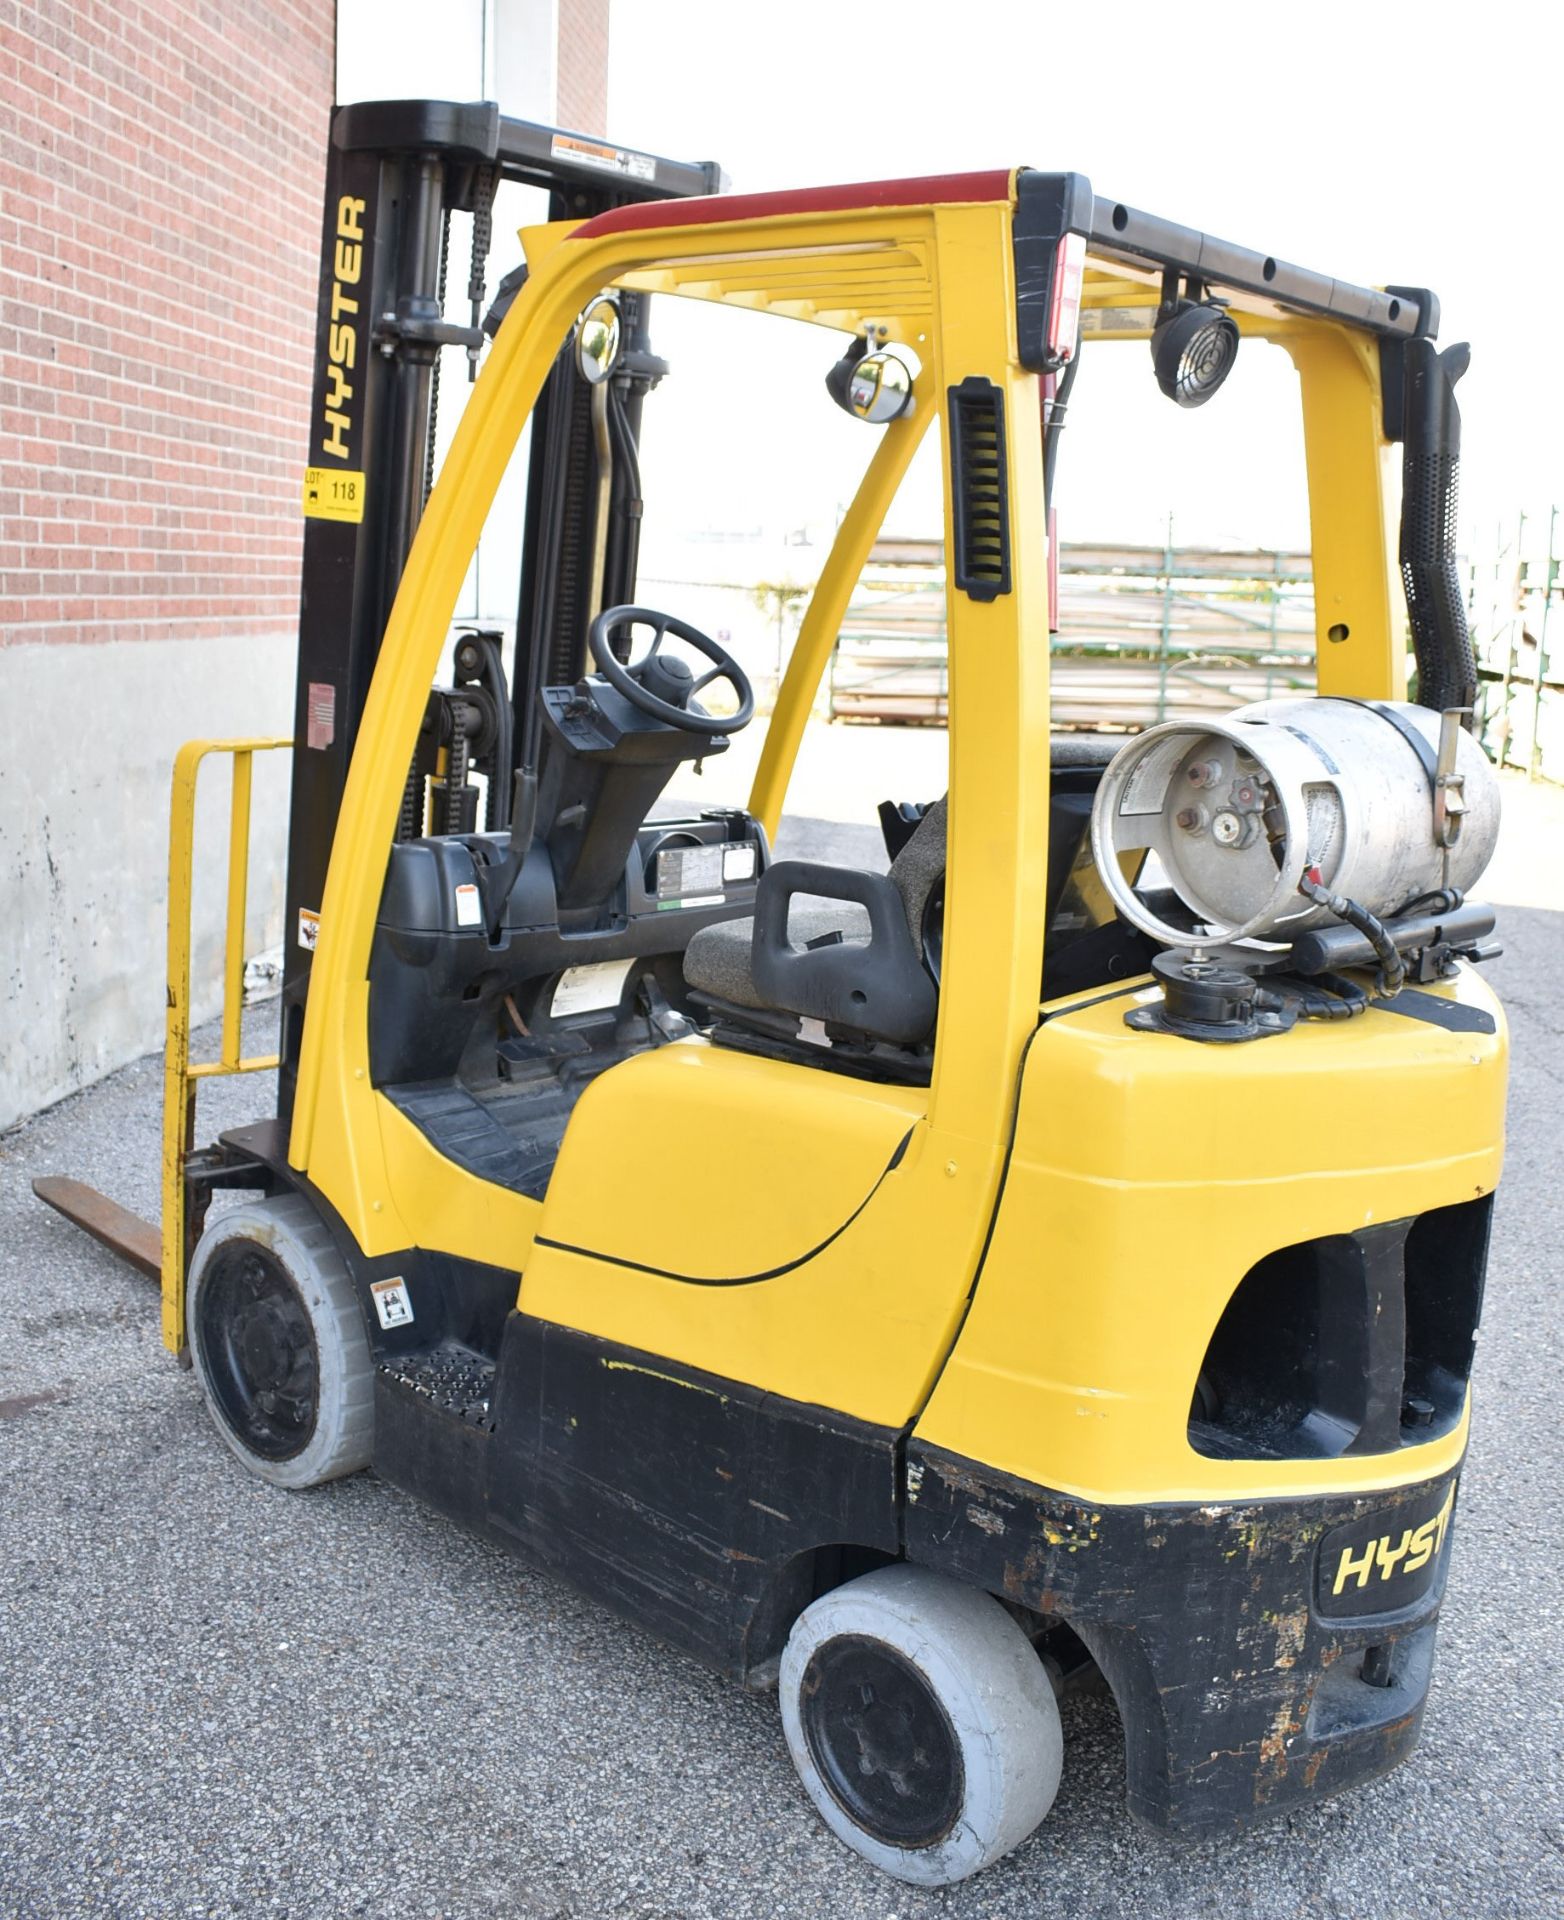 HYSTER S50FT 4,200 LB CAPACITY LPG FORKLIFT WITH 218.5" MAXIMUM LIFT HEIGHT, 3-STAGE MAST, SIDE - Image 6 of 10